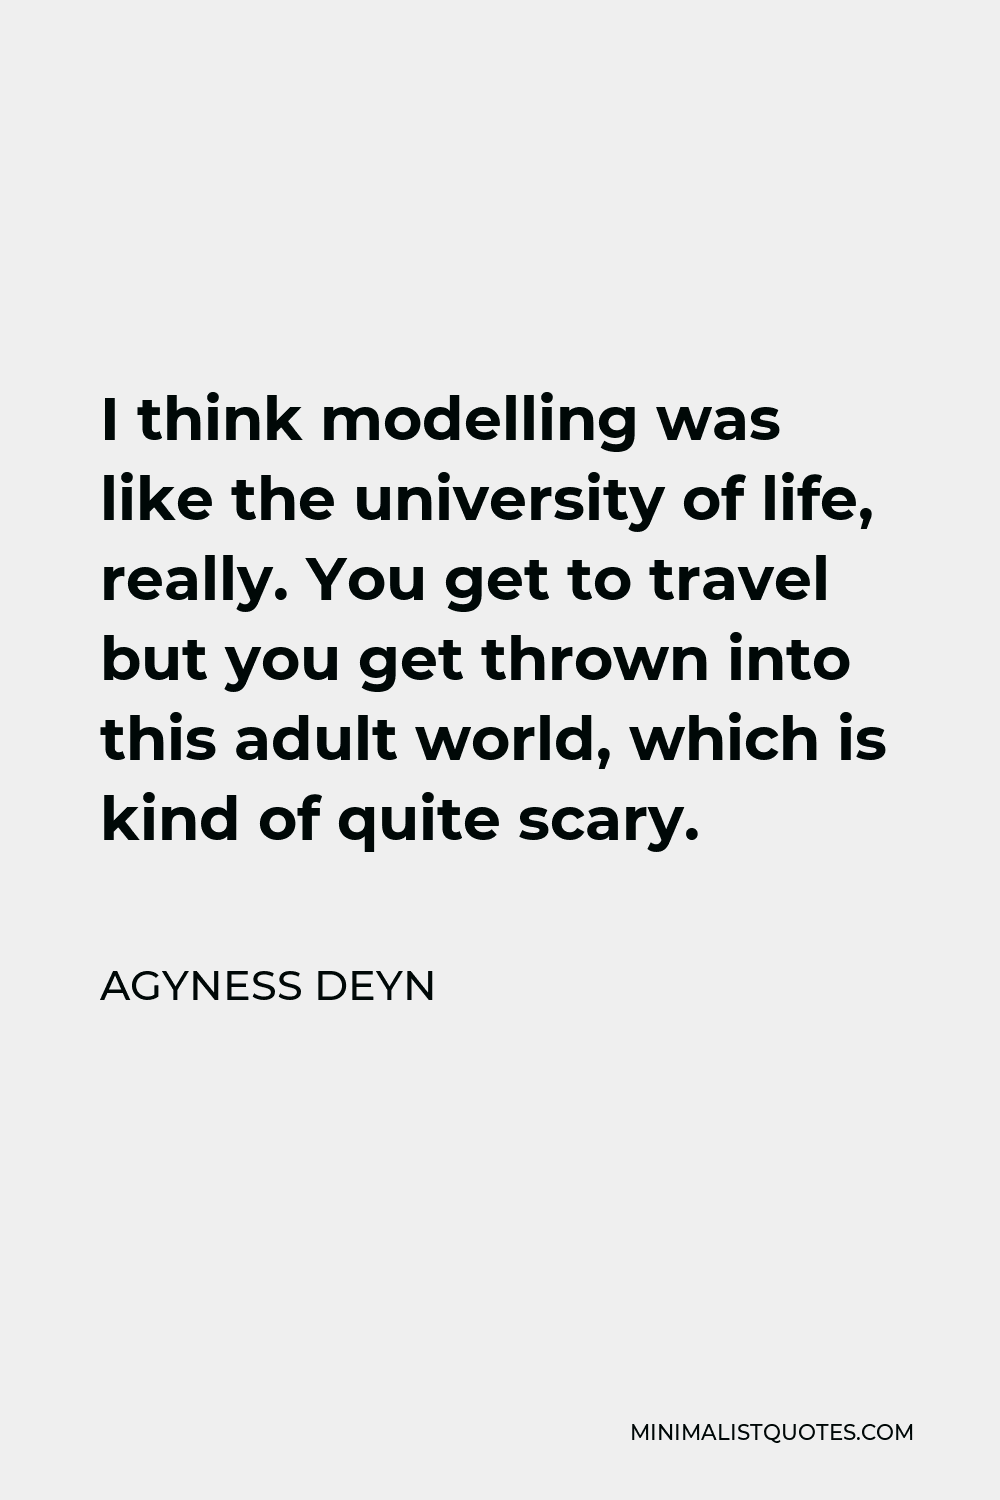 Agyness Deyn Quote - I think modelling was like the university of life, really. You get to travel but you get thrown into this adult world, which is kind of quite scary.